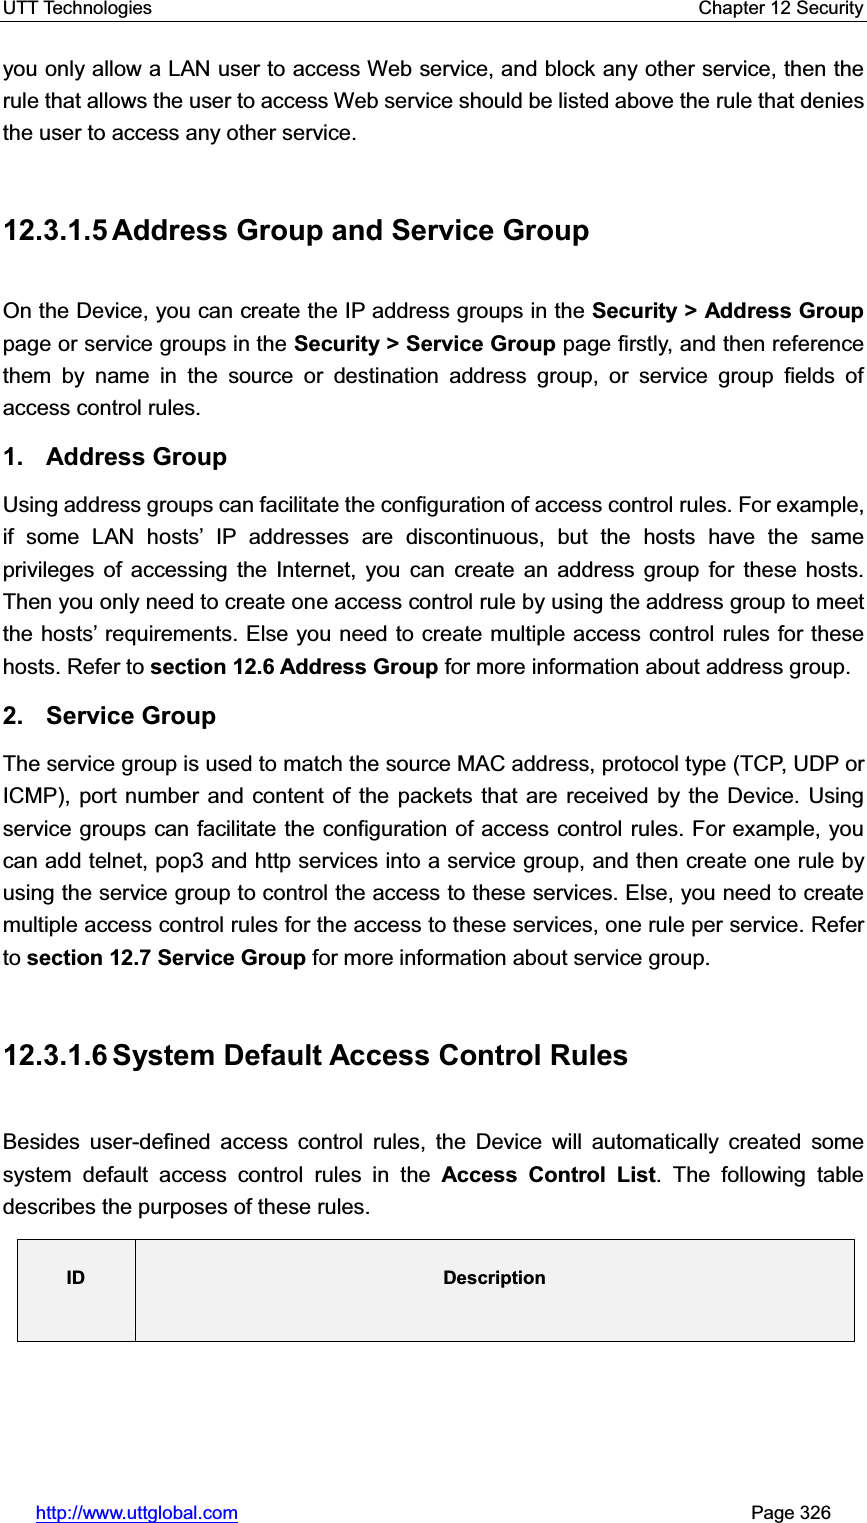 UTT Technologies    Chapter 12 Security   http://www.uttglobal.com                                                       Page 326 you only allow a LAN user to access Web service, and block any other service, then the rule that allows the user to access Web service should be listed above the rule that denies the user to access any other service. 12.3.1.5 Address Group and Service Group On the Device, you can create the IP address groups in the Security &gt; Address Grouppage or service groups in the Security &gt; Service Group page firstly, and then reference them by name in the source or destination address group, or service group fields of access control rules.   1. Address Group Using address groups can facilitate the configuration of access control rules. For example, if some LAN hosts¶ IP addresses are discontinuous, but the hosts have the same privileges of accessing the Internet, you can create an address group for these hosts. Then you only need to create one access control rule by using the address group to meet the KRVWV¶ requirements. Else you need to create multiple access control rules for these hosts. Refer to section 12.6 Address Group for more information about address group. 2. Service Group The service group is used to match the source MAC address, protocol type (TCP, UDP or ICMP), port number and content of the packets that are received by the Device. Using service groups can facilitate the configuration of access control rules. For example, you can add telnet, pop3 and http services into a service group, and then create one rule by using the service group to control the access to these services. Else, you need to create multiple access control rules for the access to these services, one rule per service. Refer to section 12.7 Service Group for more information about service group. 12.3.1.6 System Default Access  Control  Rules Besides user-defined access control rules, the Device will automatically created some system default access control rules in the Access Control List. The following table describes the purposes of these rules. ID Description